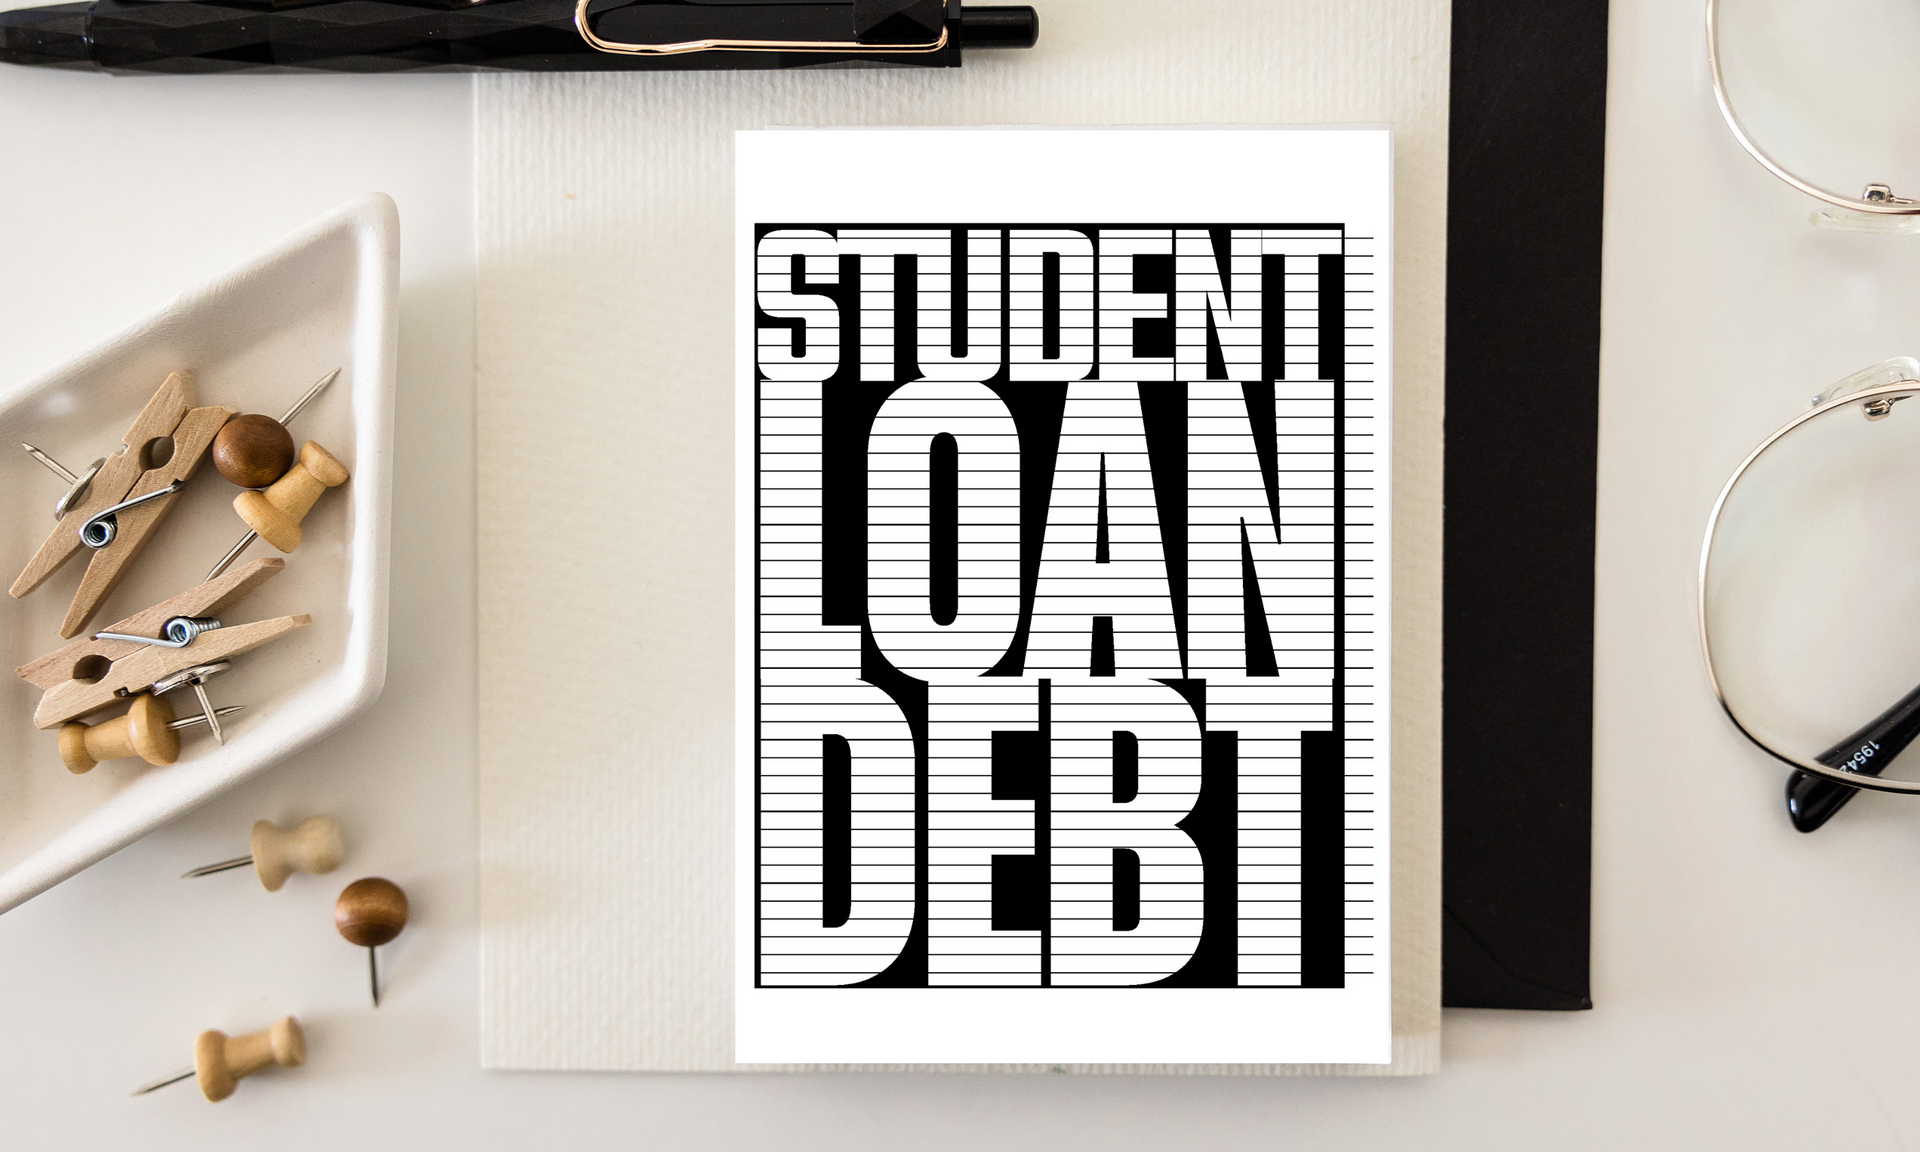 Whether you have credit card debt, student loans, a car loan, or mortgage debt, use these debt free 